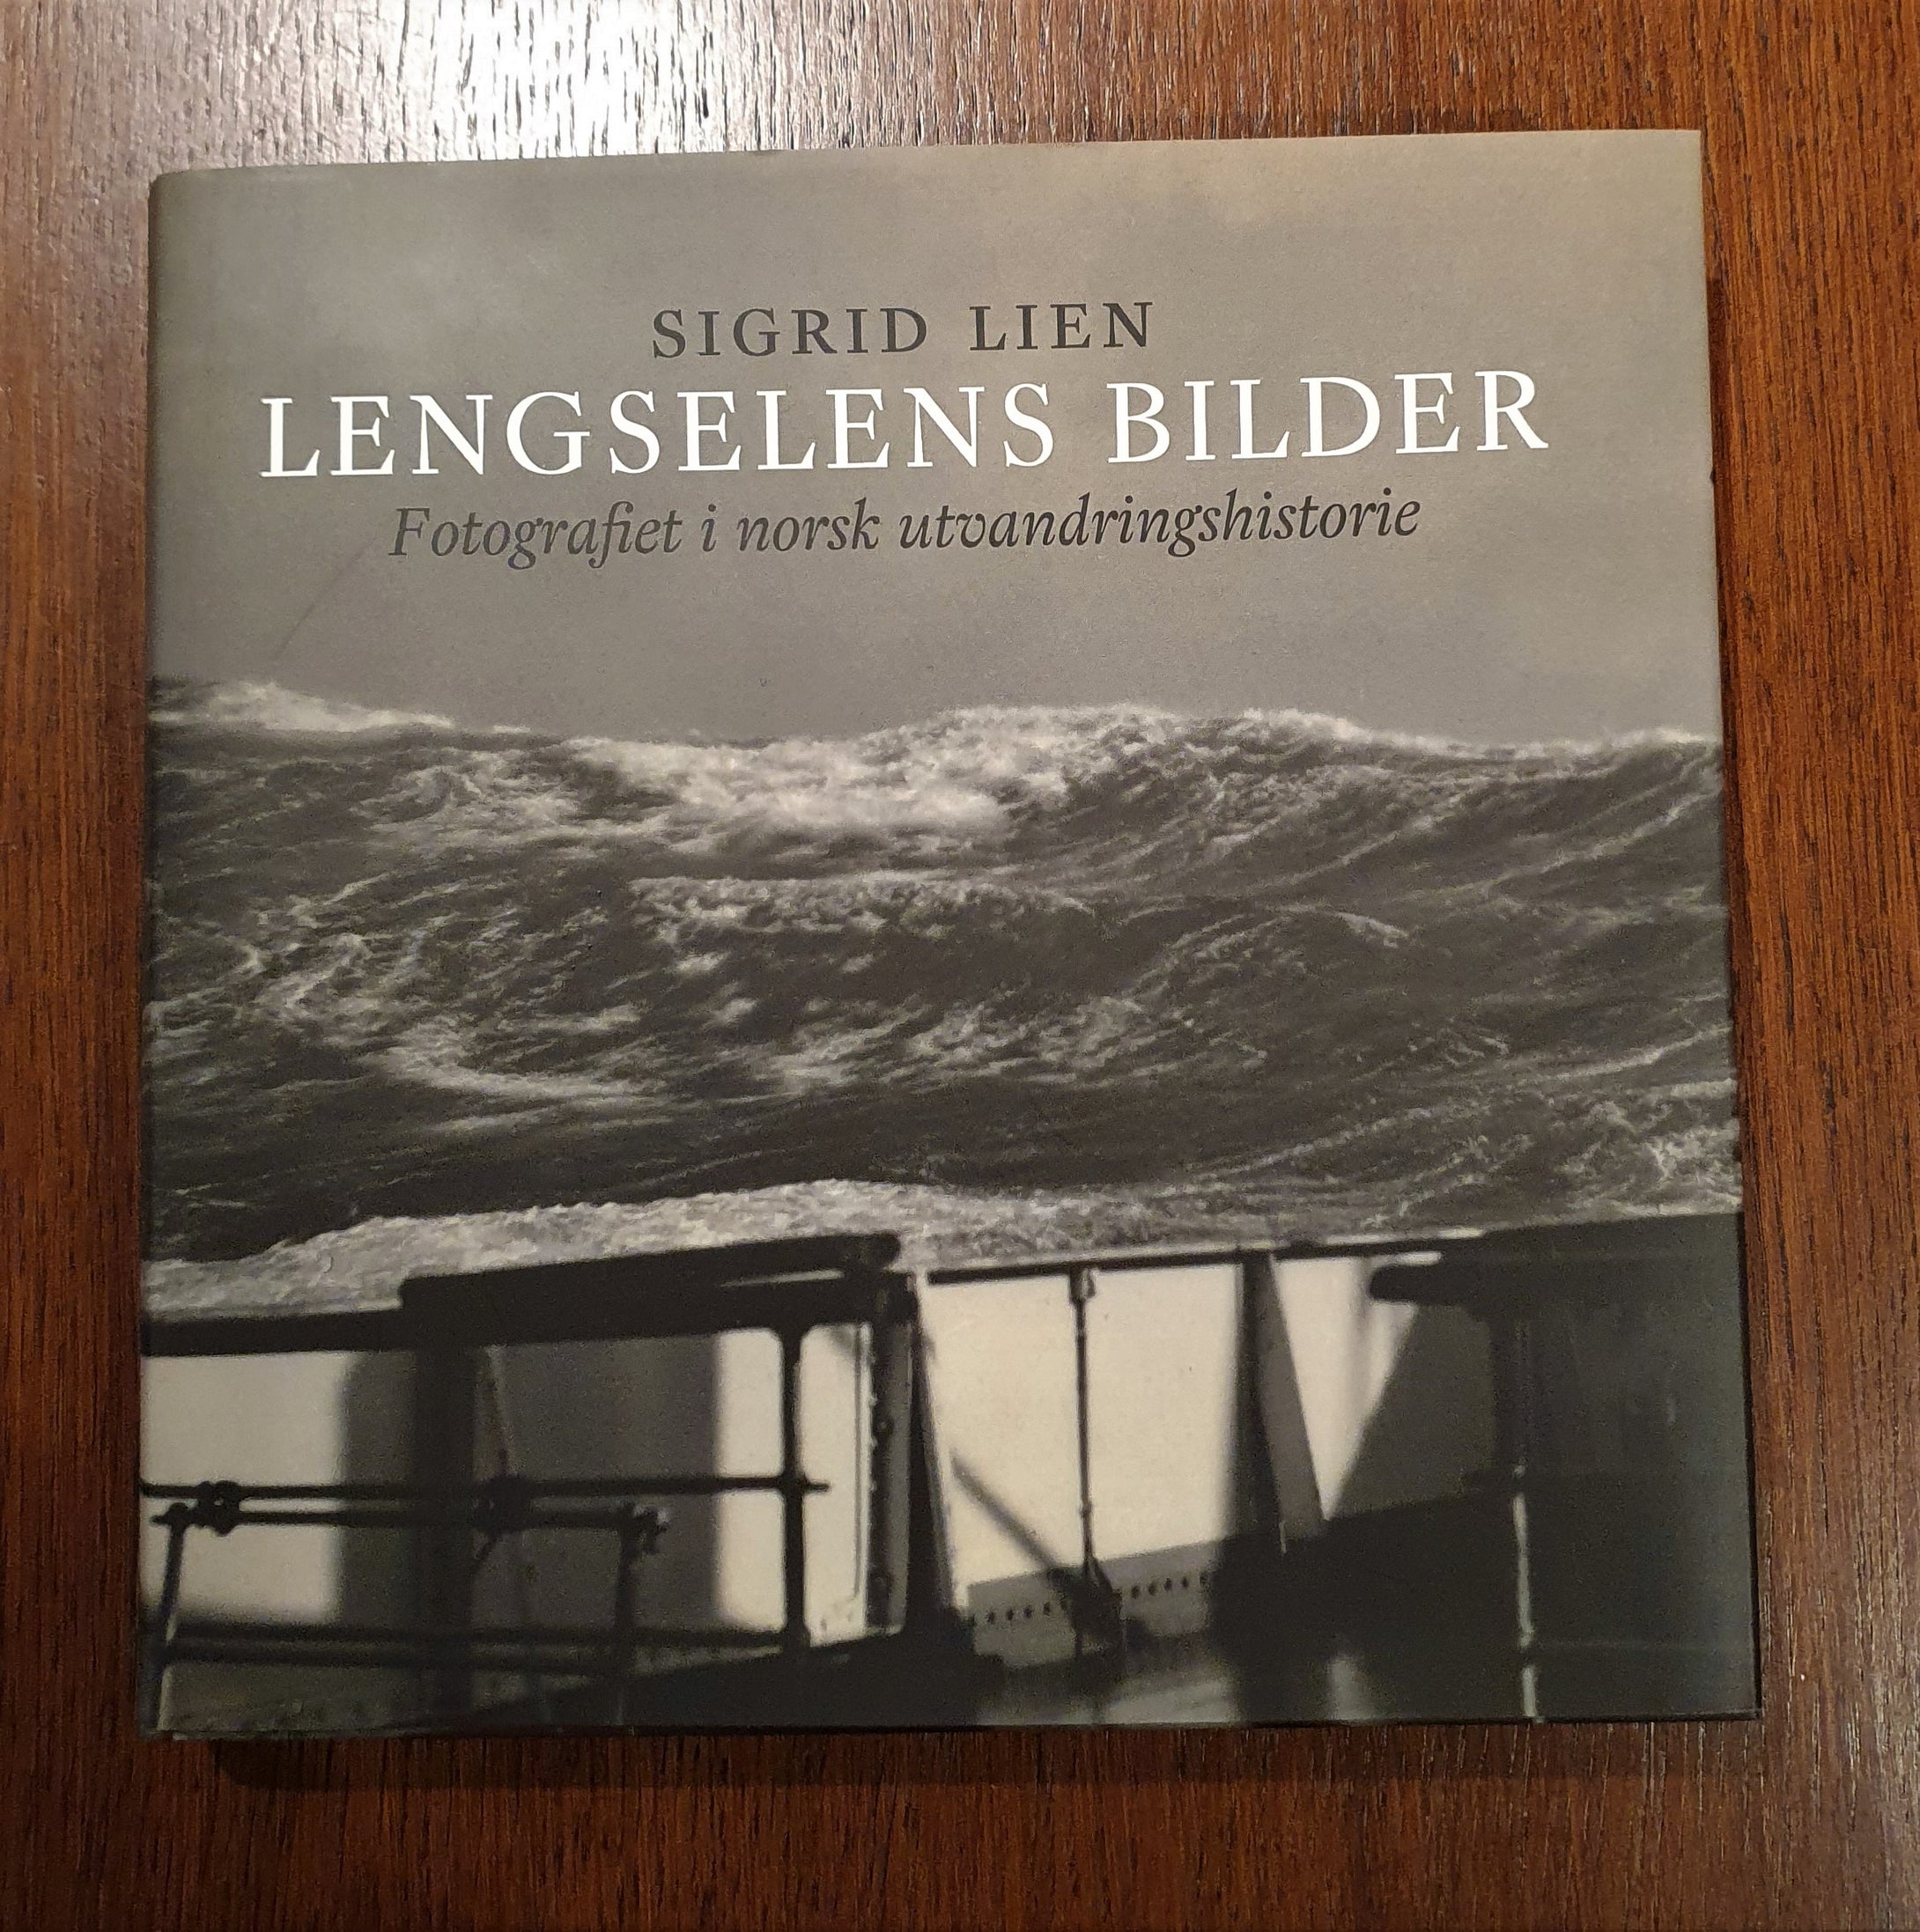 Images of longing - photography in Norwegian emigration history